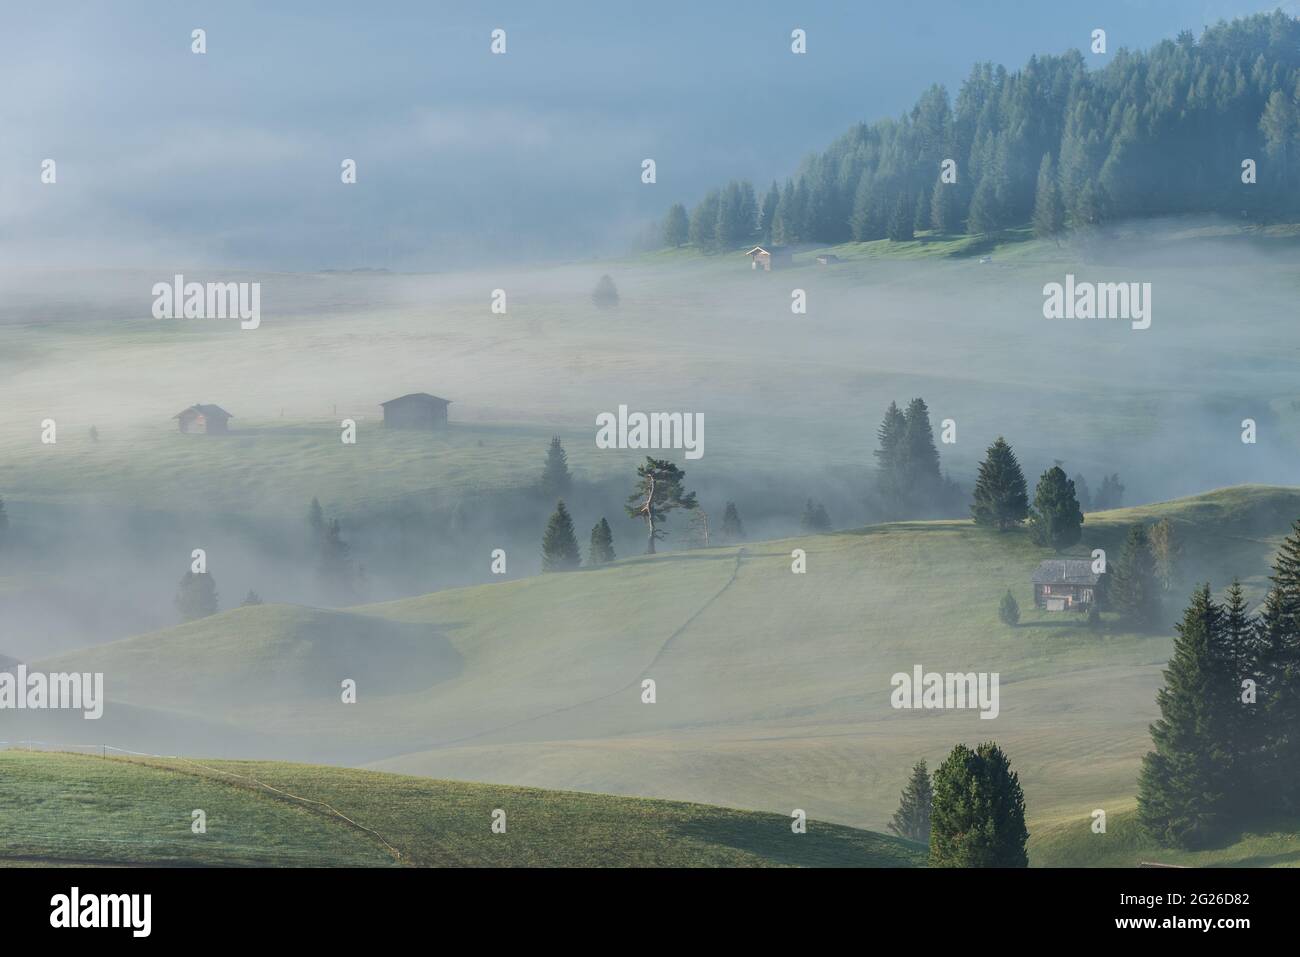 Misty day on a hill with trees and cabins around in Zermatt, Switzerland Stock Photo